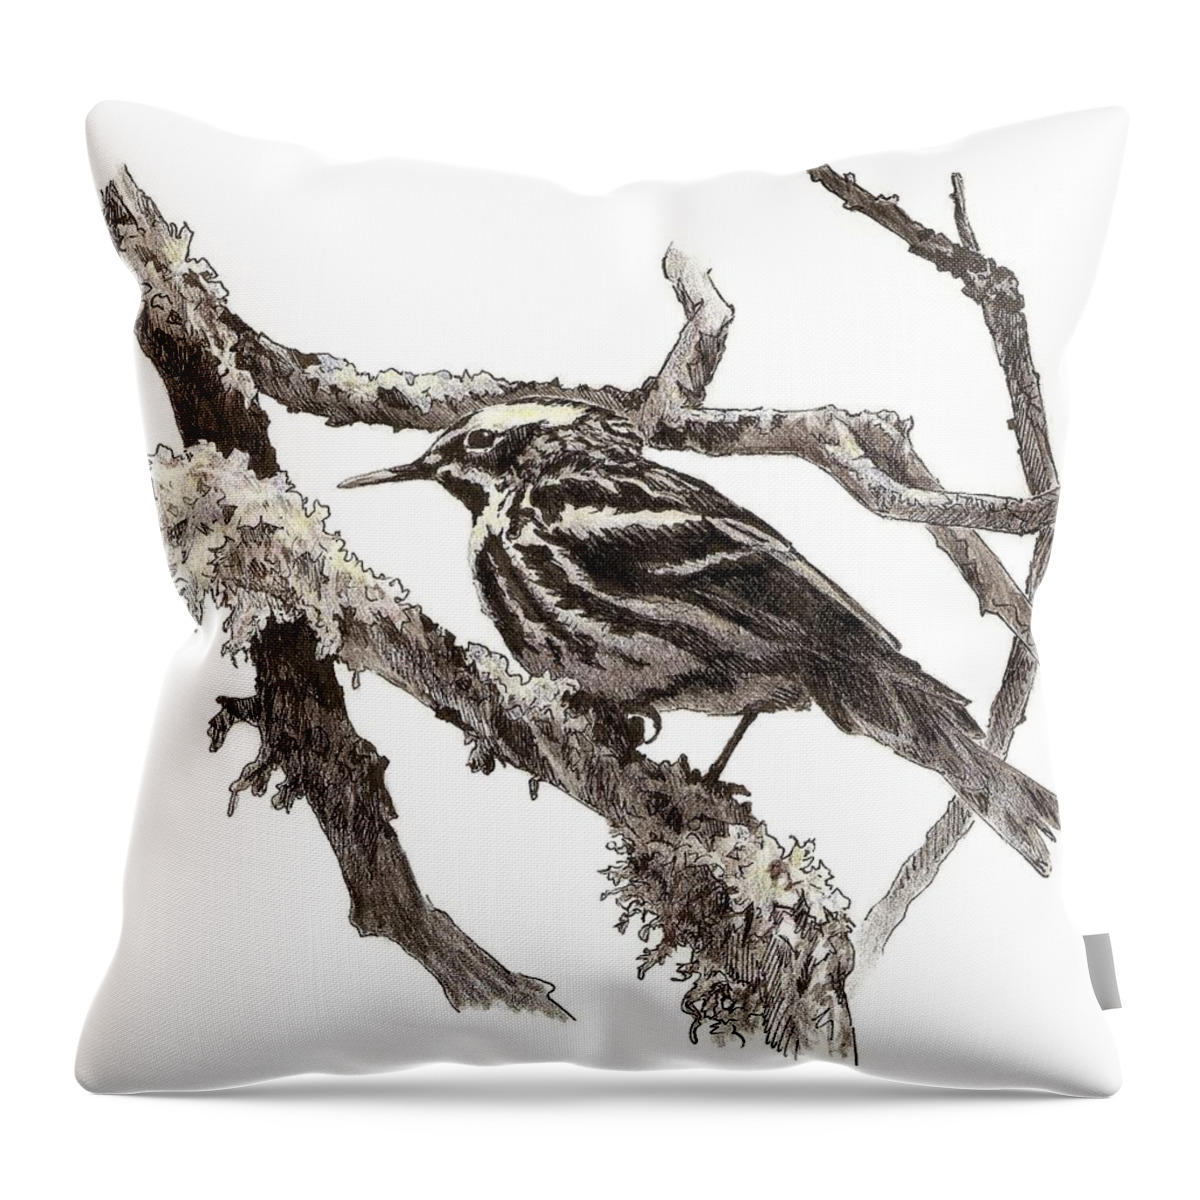 Black-and-white Warbler Throw Pillow featuring the drawing Black-and-white Warbler by Abby McBride